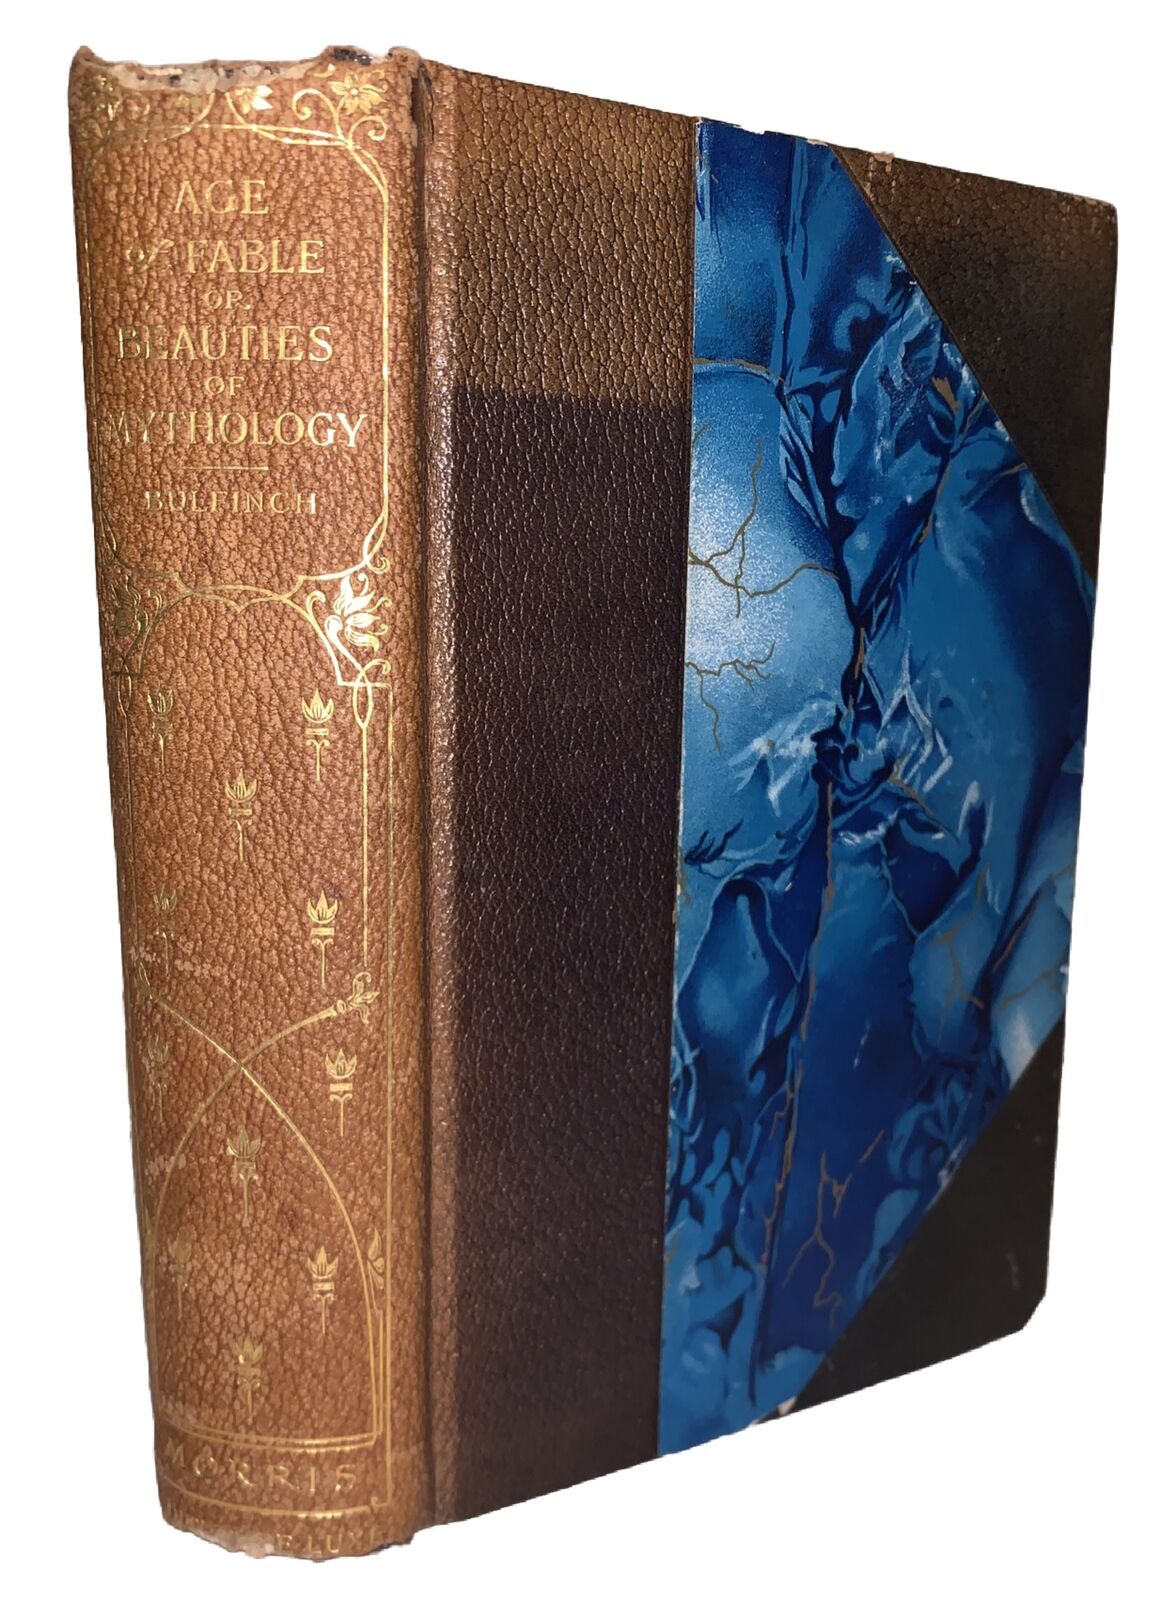 1898, 1 of 2000, THOMAS BULFINCH, THE AGE OF FABLE OR BEAUTIES OF MYTHOLOGY